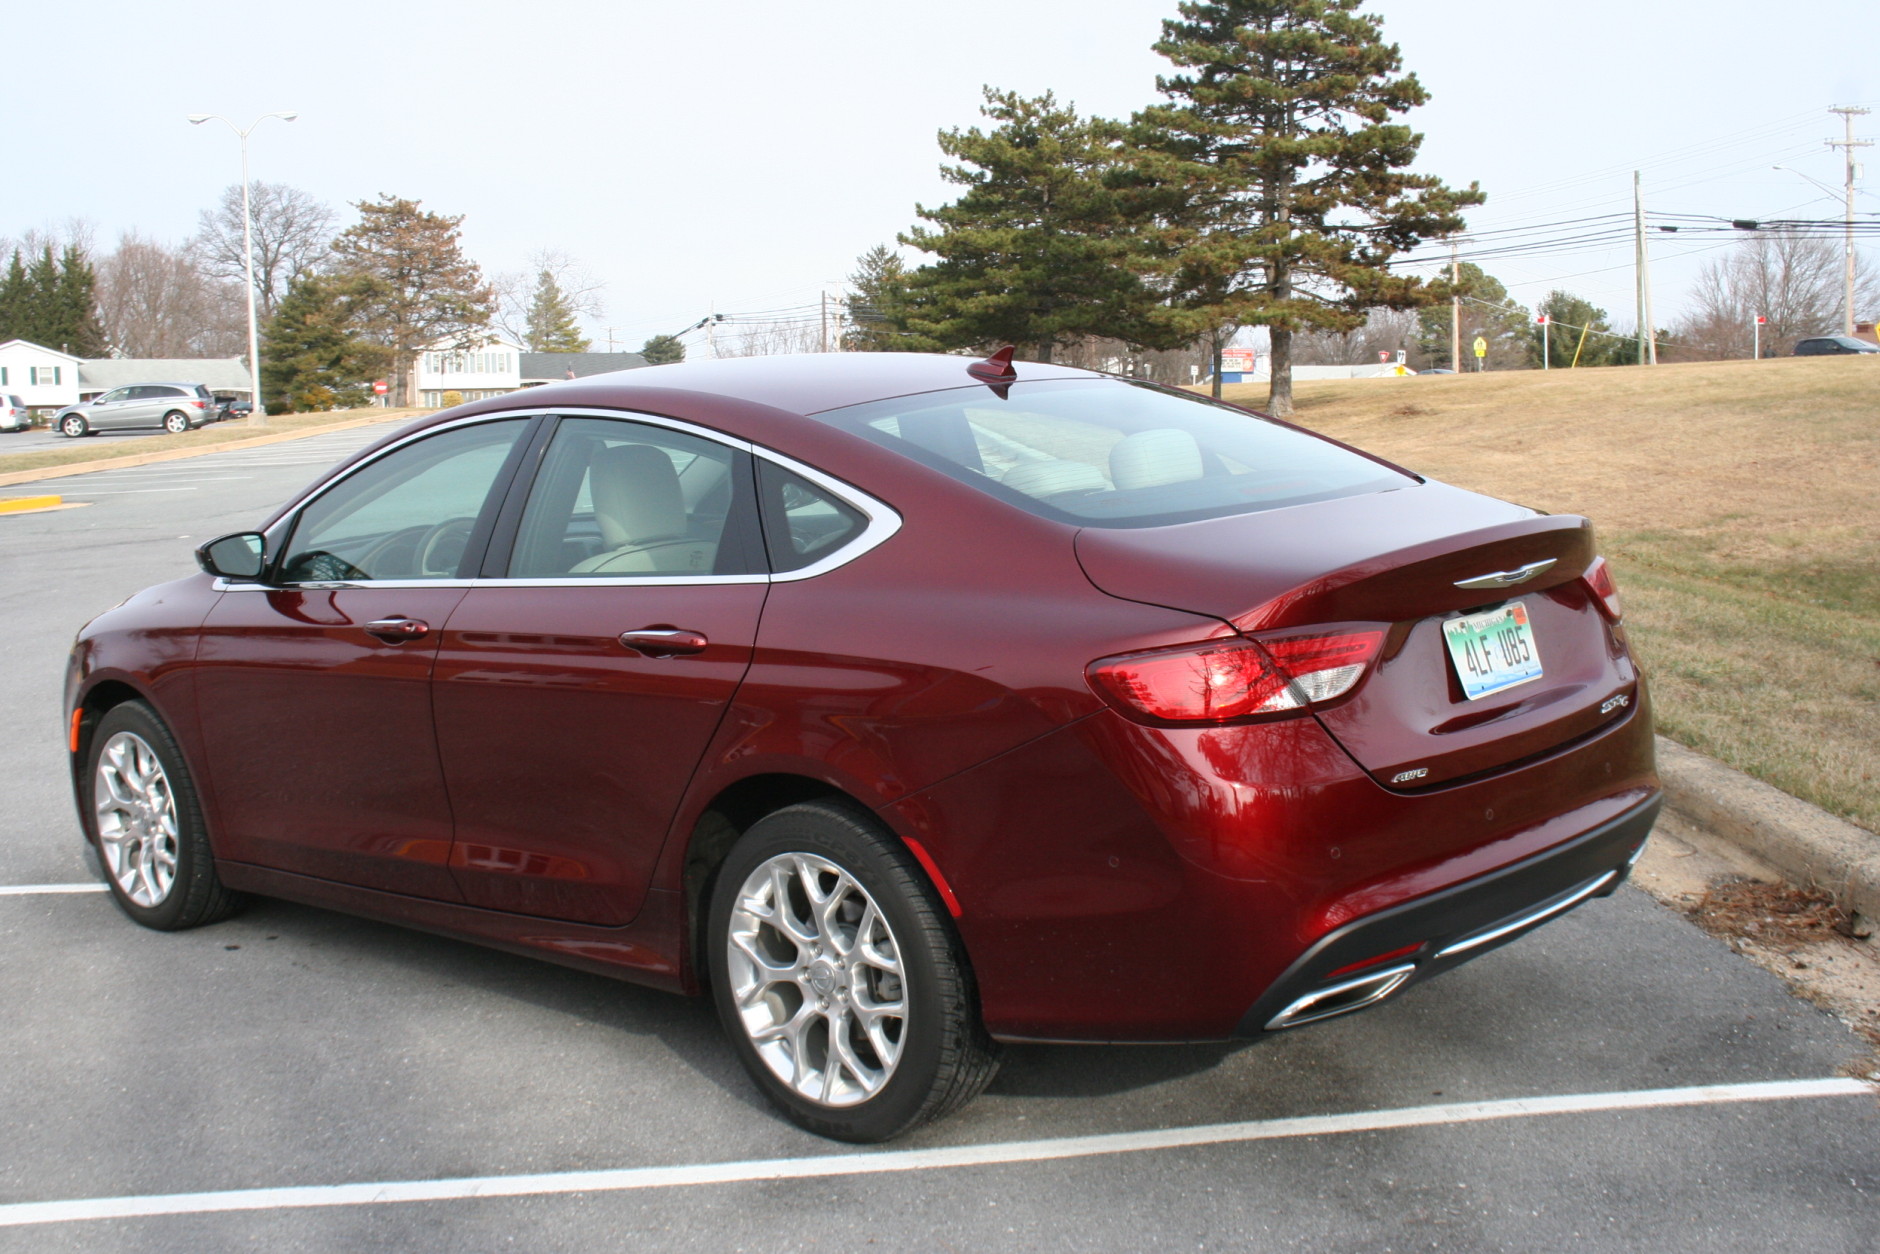 The looks are sleek and rather sporty for the usual midsize sedan. (WTOP/Mike Parris)